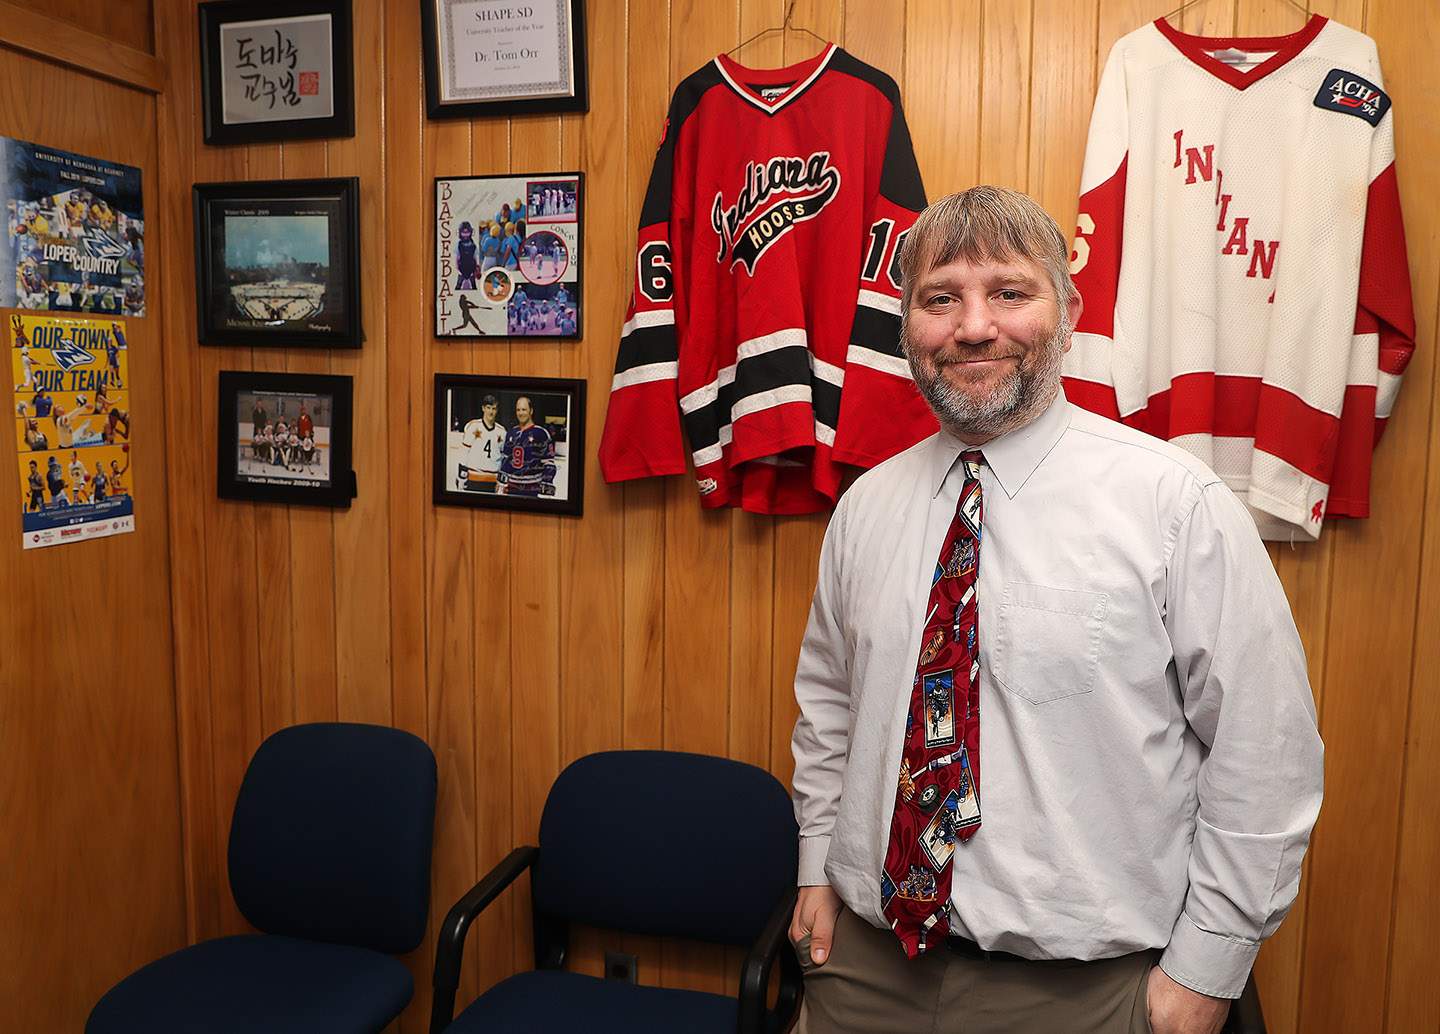 Thomas Orr played and coached collegiate hockey before joining UNK in August 2019. He still serves as the Midwest scout for Indiana University. (Photo by Erika Pritchard, UNK Communications)